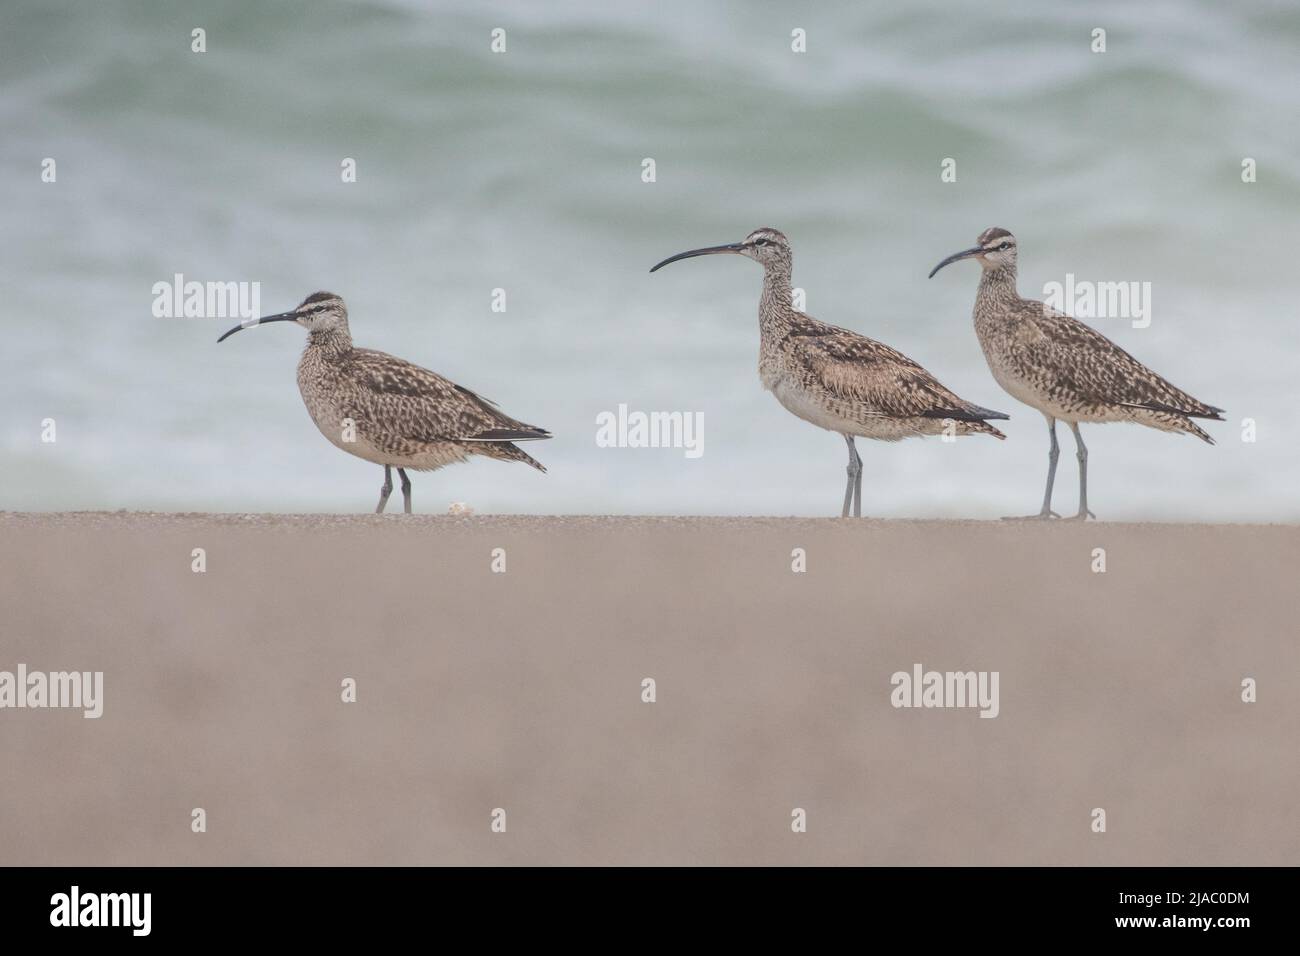 A flock of American Whimbrel (Numenius phaeopus hudsonicus) on the beach near the Pacific ocean in Point Reyes National seashore, California, USA. Stock Photo